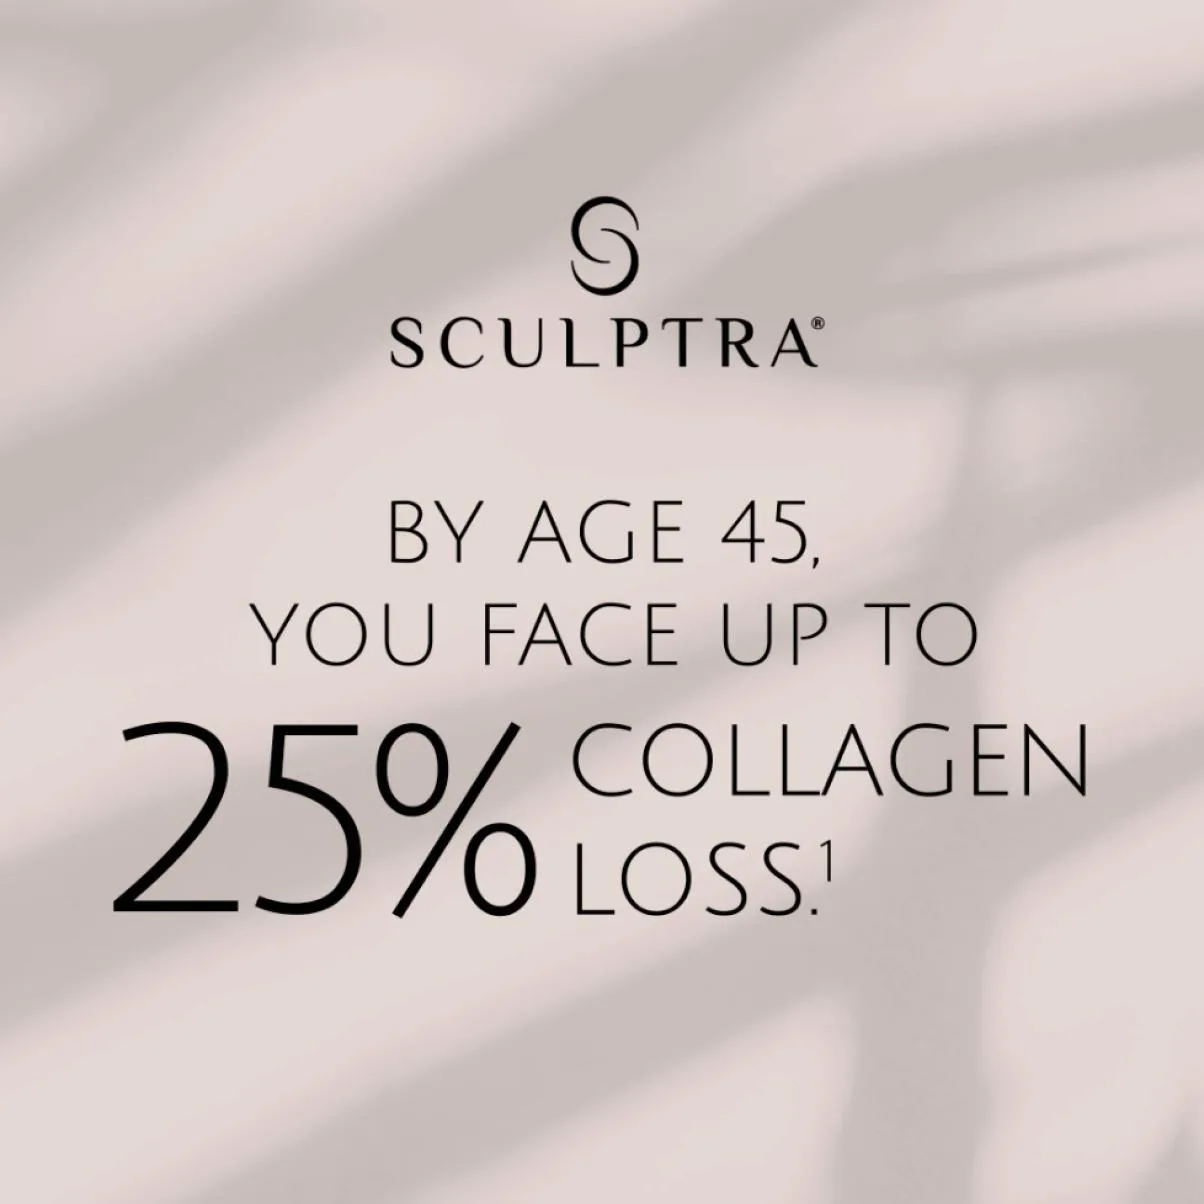 sculptra collagen loss ethereal aesthetics vancouver, wa